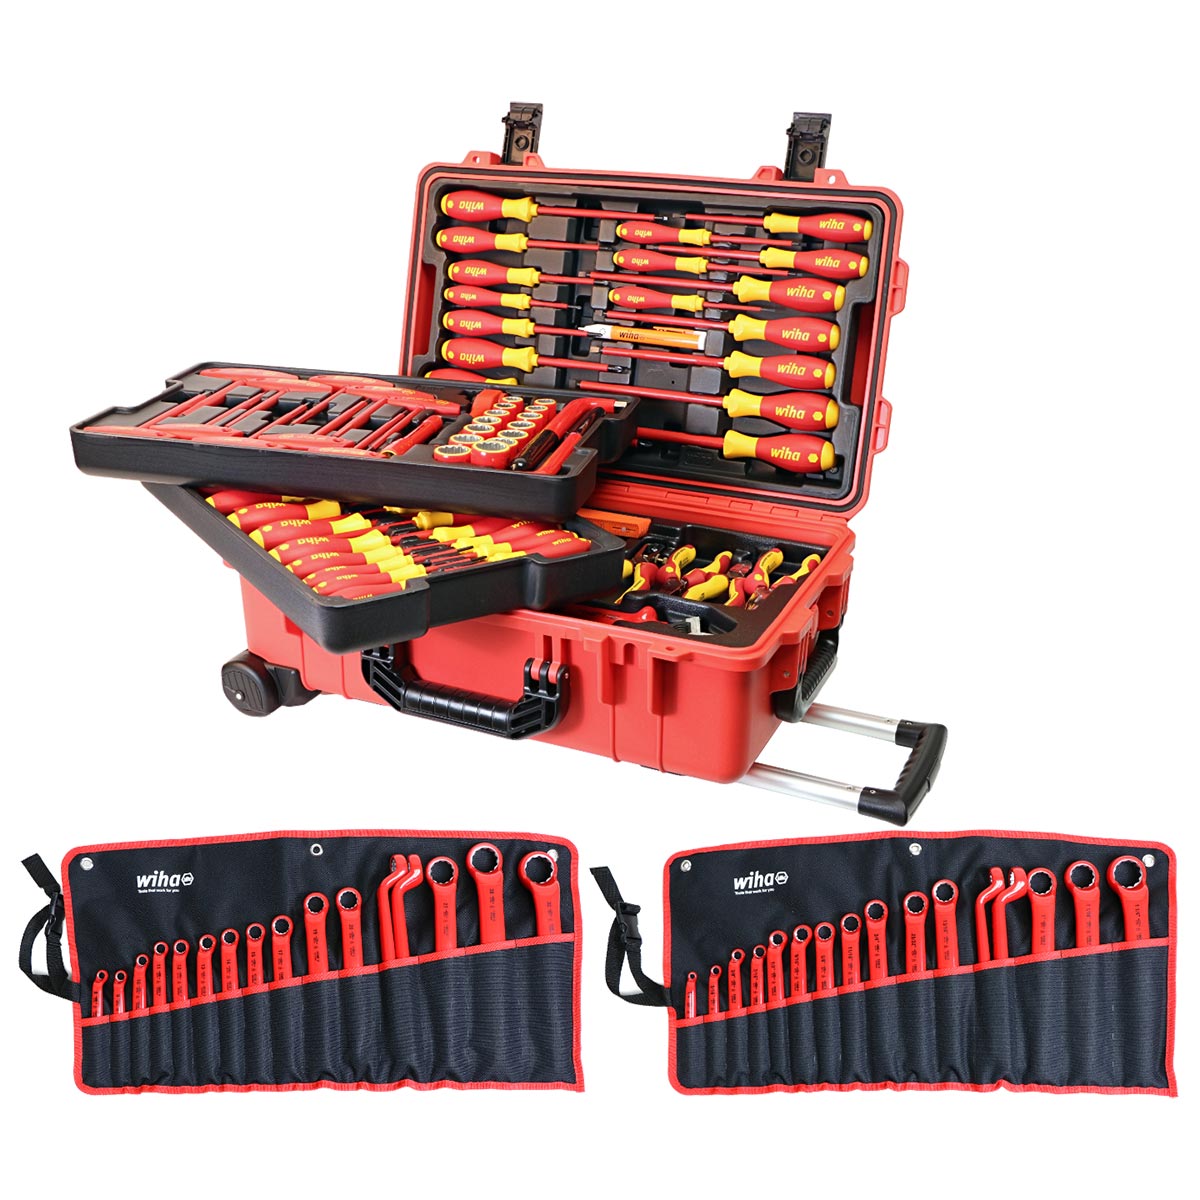 Wiha Master Electricians Insulated Tools Set In Rolling Hard Case - 112 Piece Set